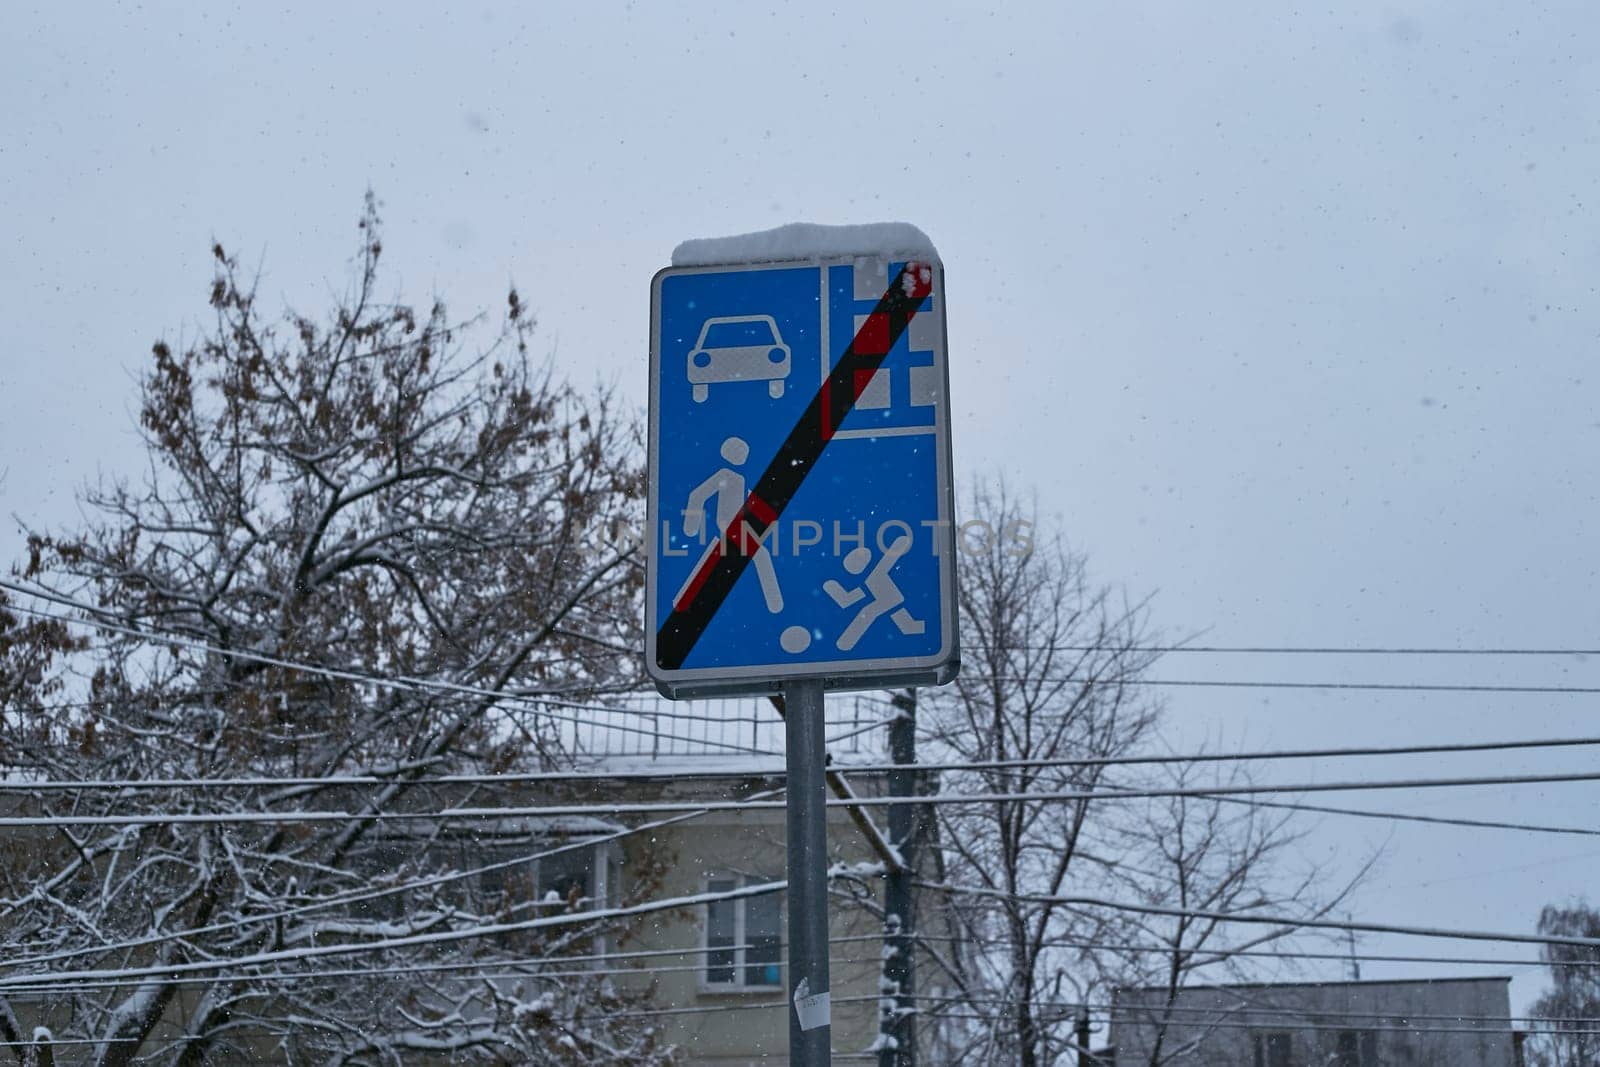 Photo a blue traffic sign in winter on the background by electrovenik